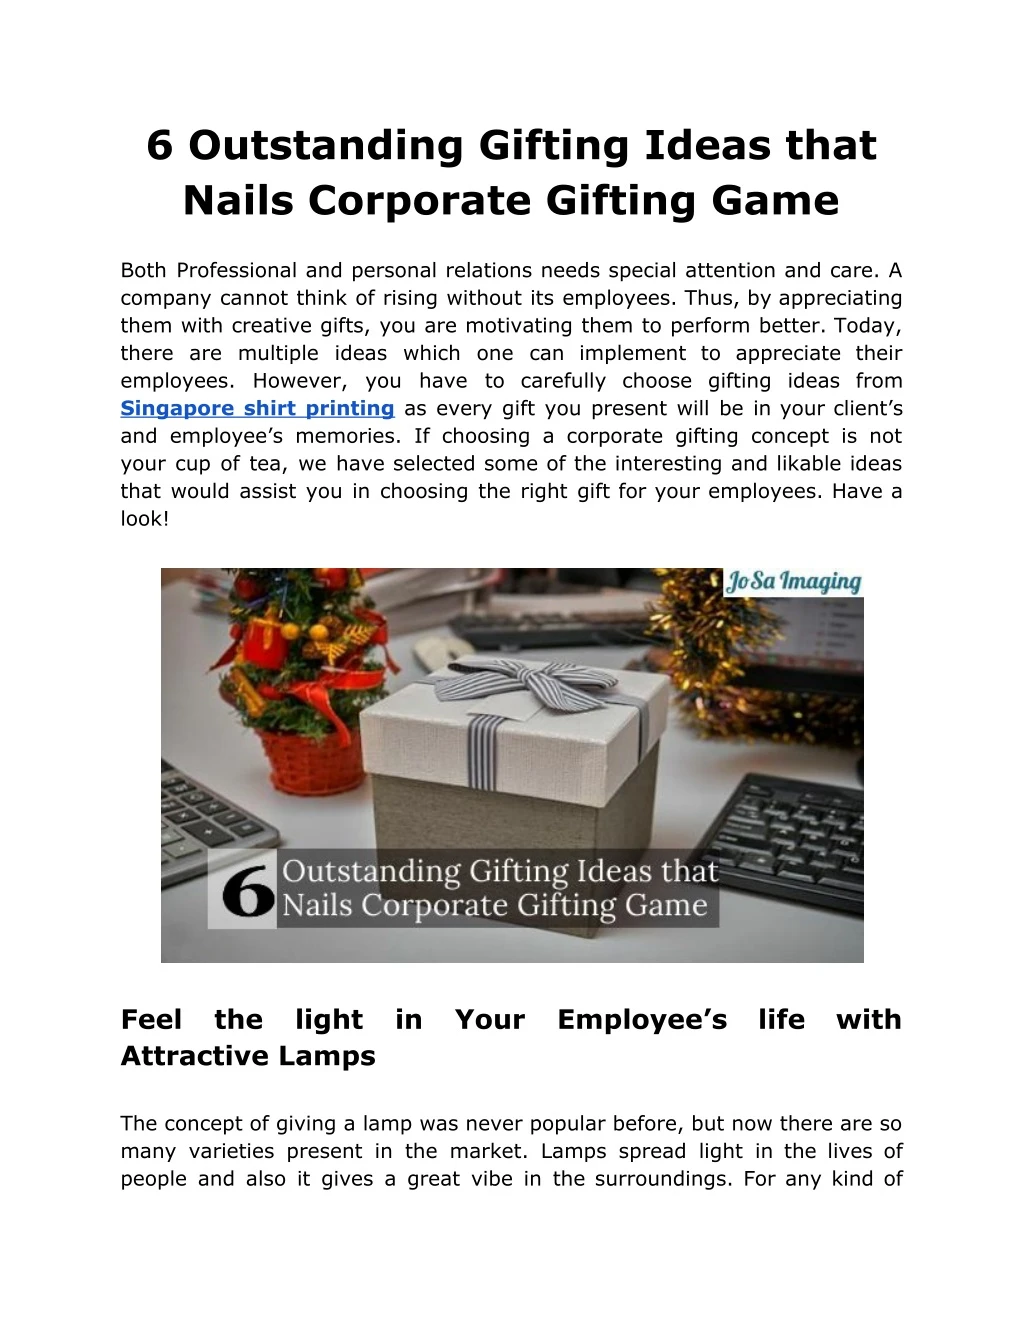 6 outstanding gifting ideas that nails corporate